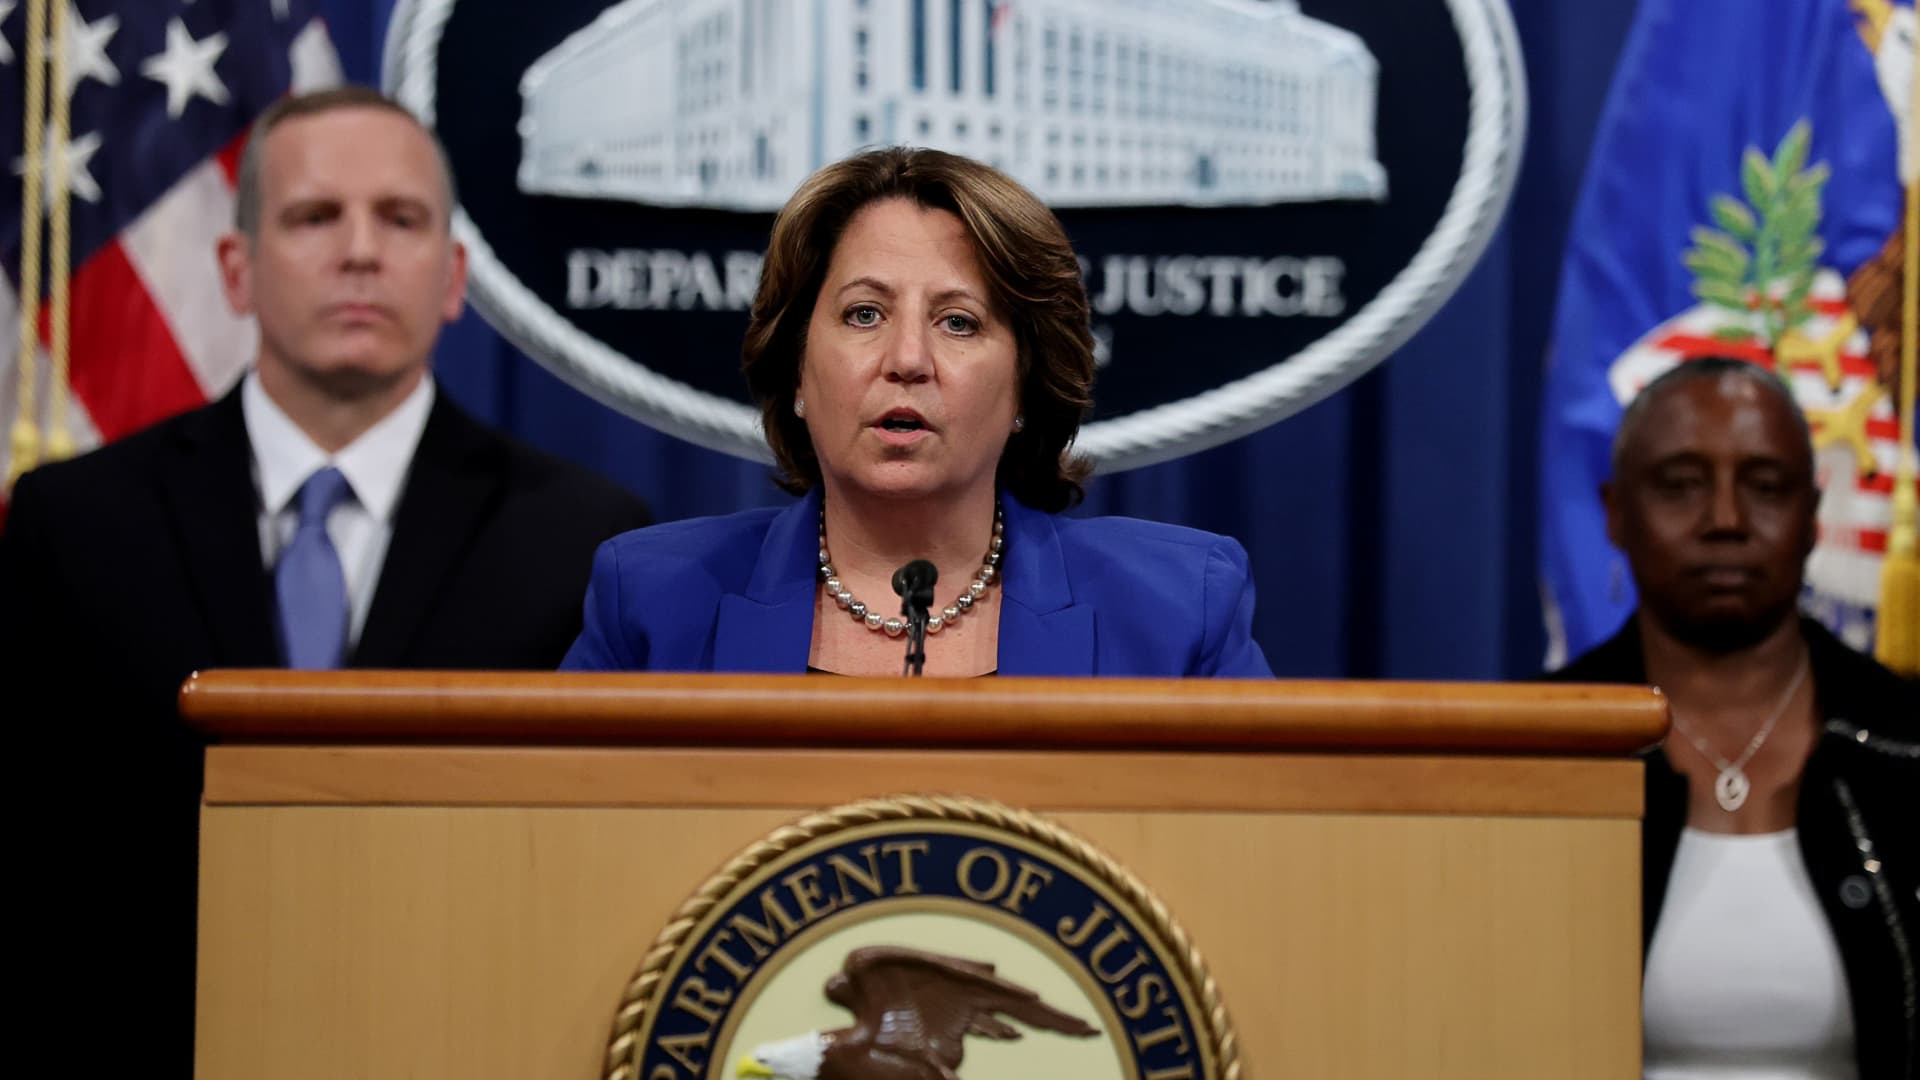 Deputy U.S. Attorney General Lisa Monaco announces the recovery of millions of dollars worth of cryptocurrency from the Colonial Pipeline Co. ransomware attacks as she speaks during a news conference with FBI Deputy Director Paul Abbate and Acting U.S. Attorney for the Northern District of California Stephanie Hinds at the Justice Department in Washington, June 7, 2021.